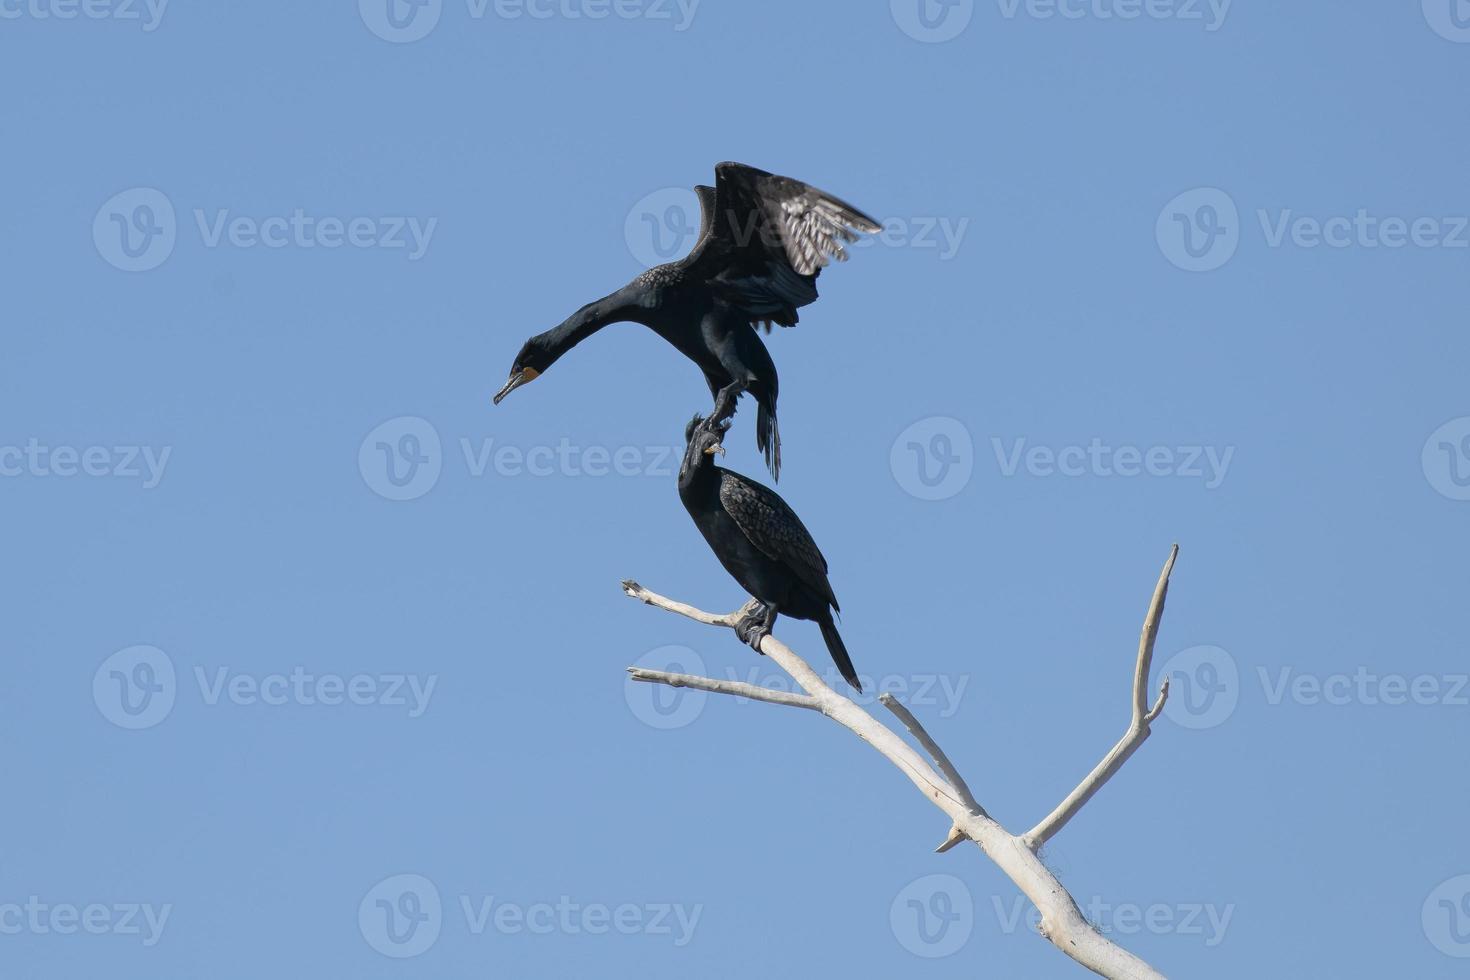 North American Wildlife. Double-crested cormorant in flight with a clear blue sky photo